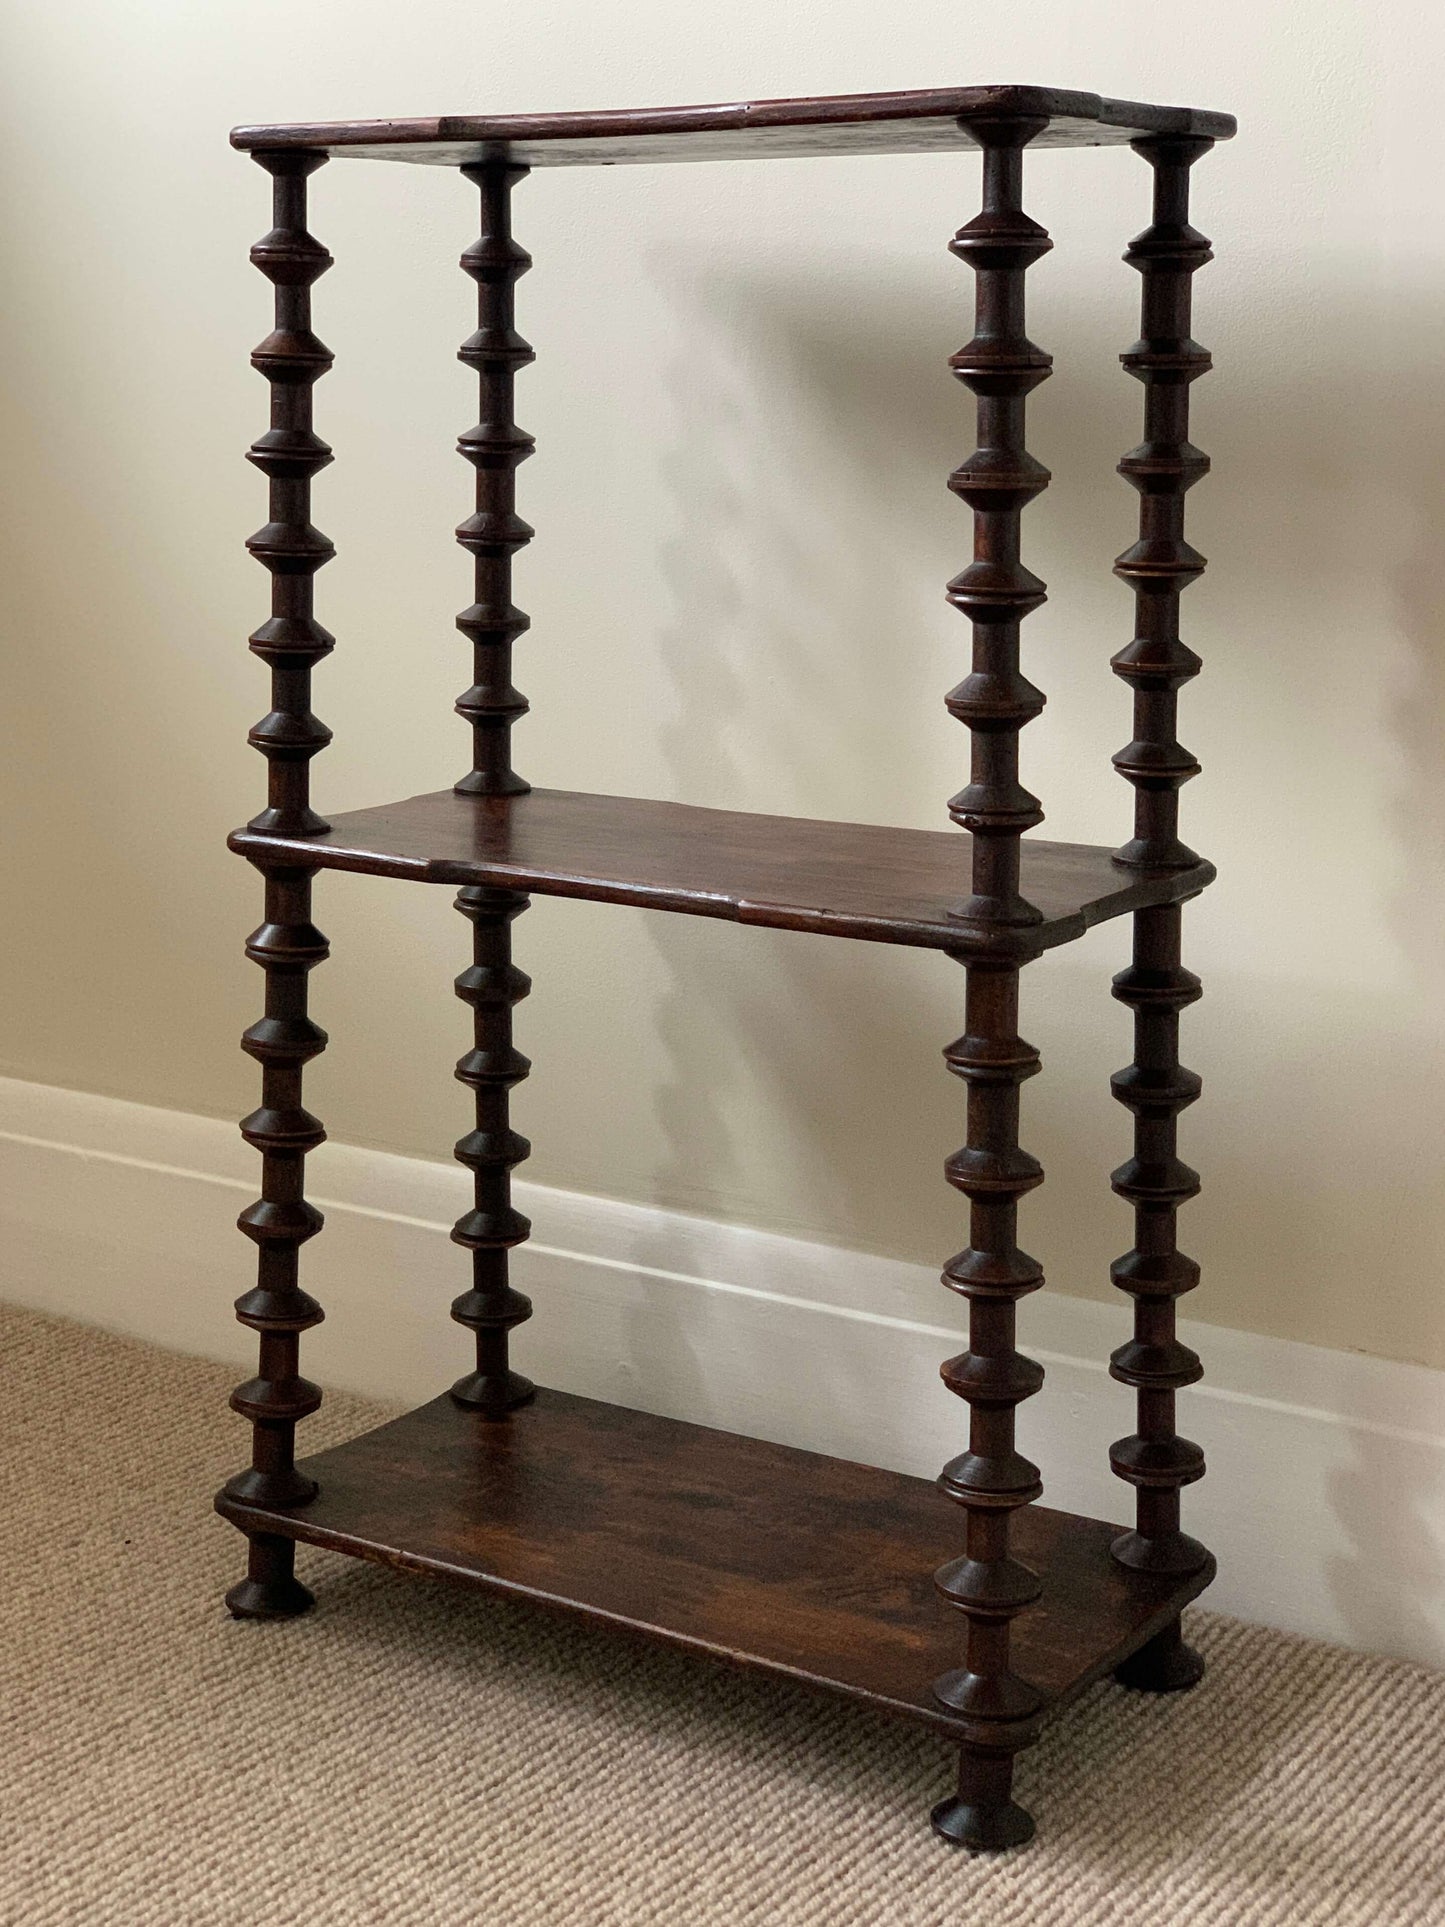 French antique spindle shelving unit